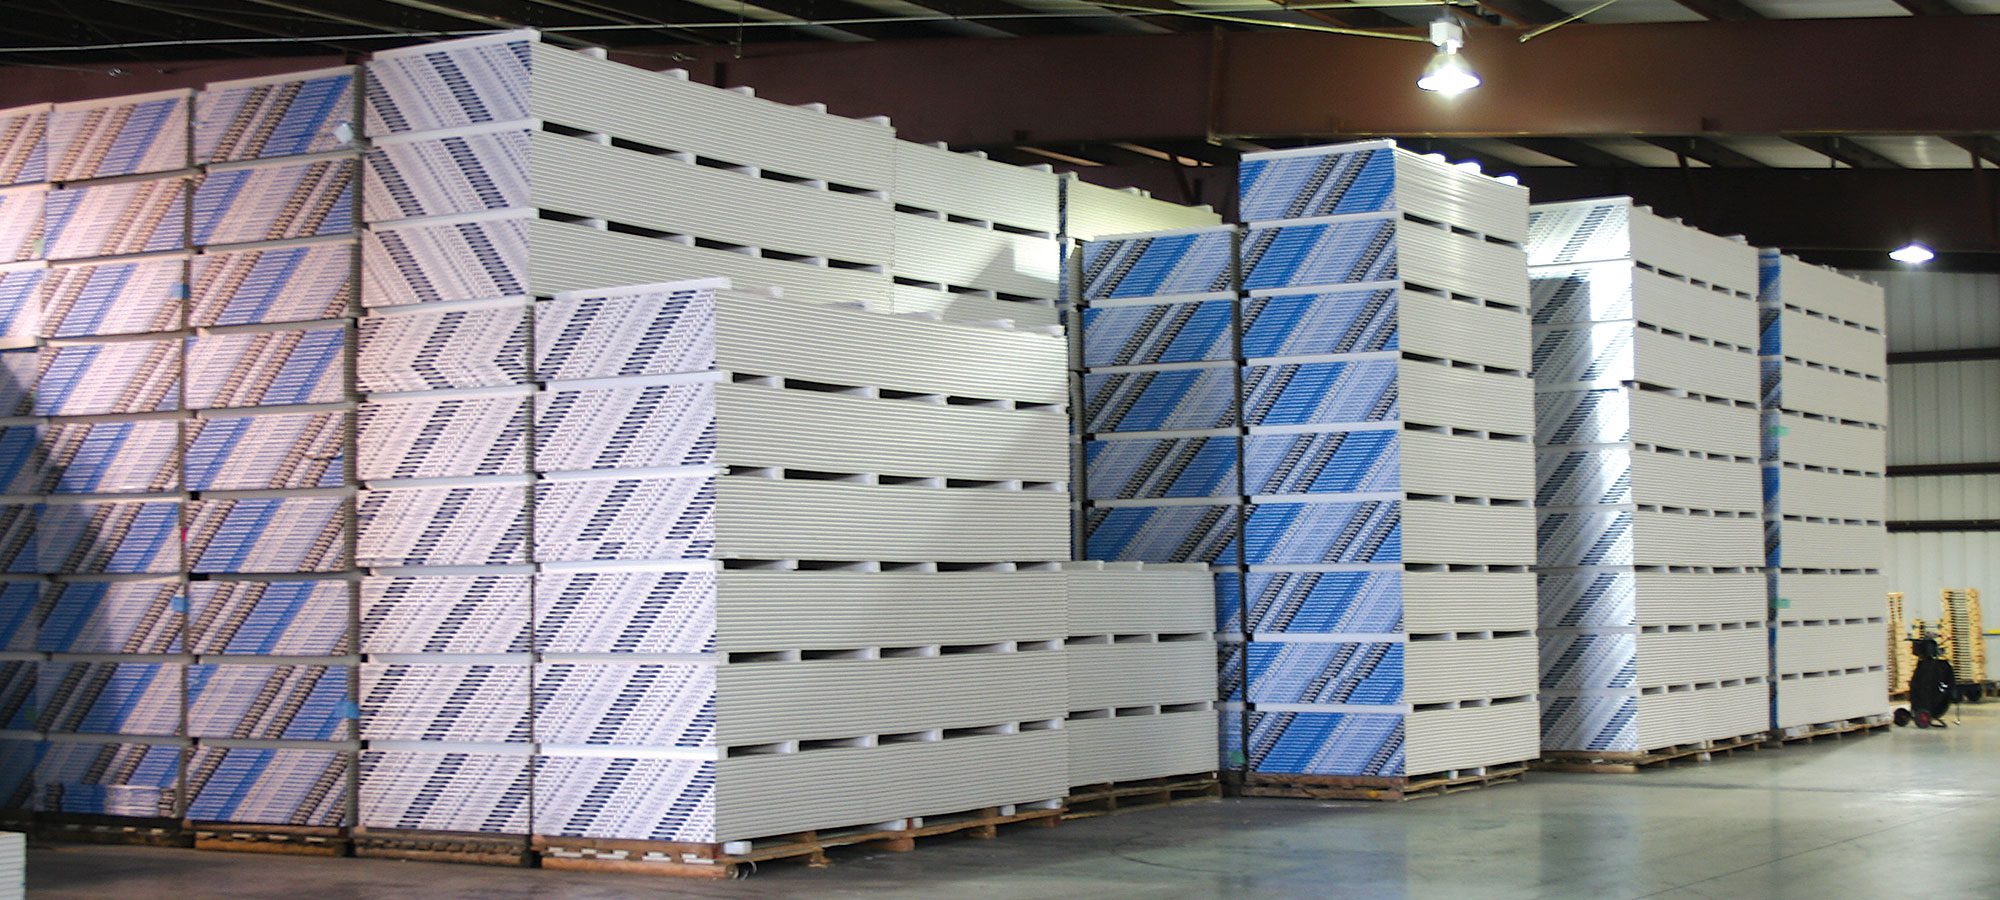 Drywall Supply Stacks in warehouse